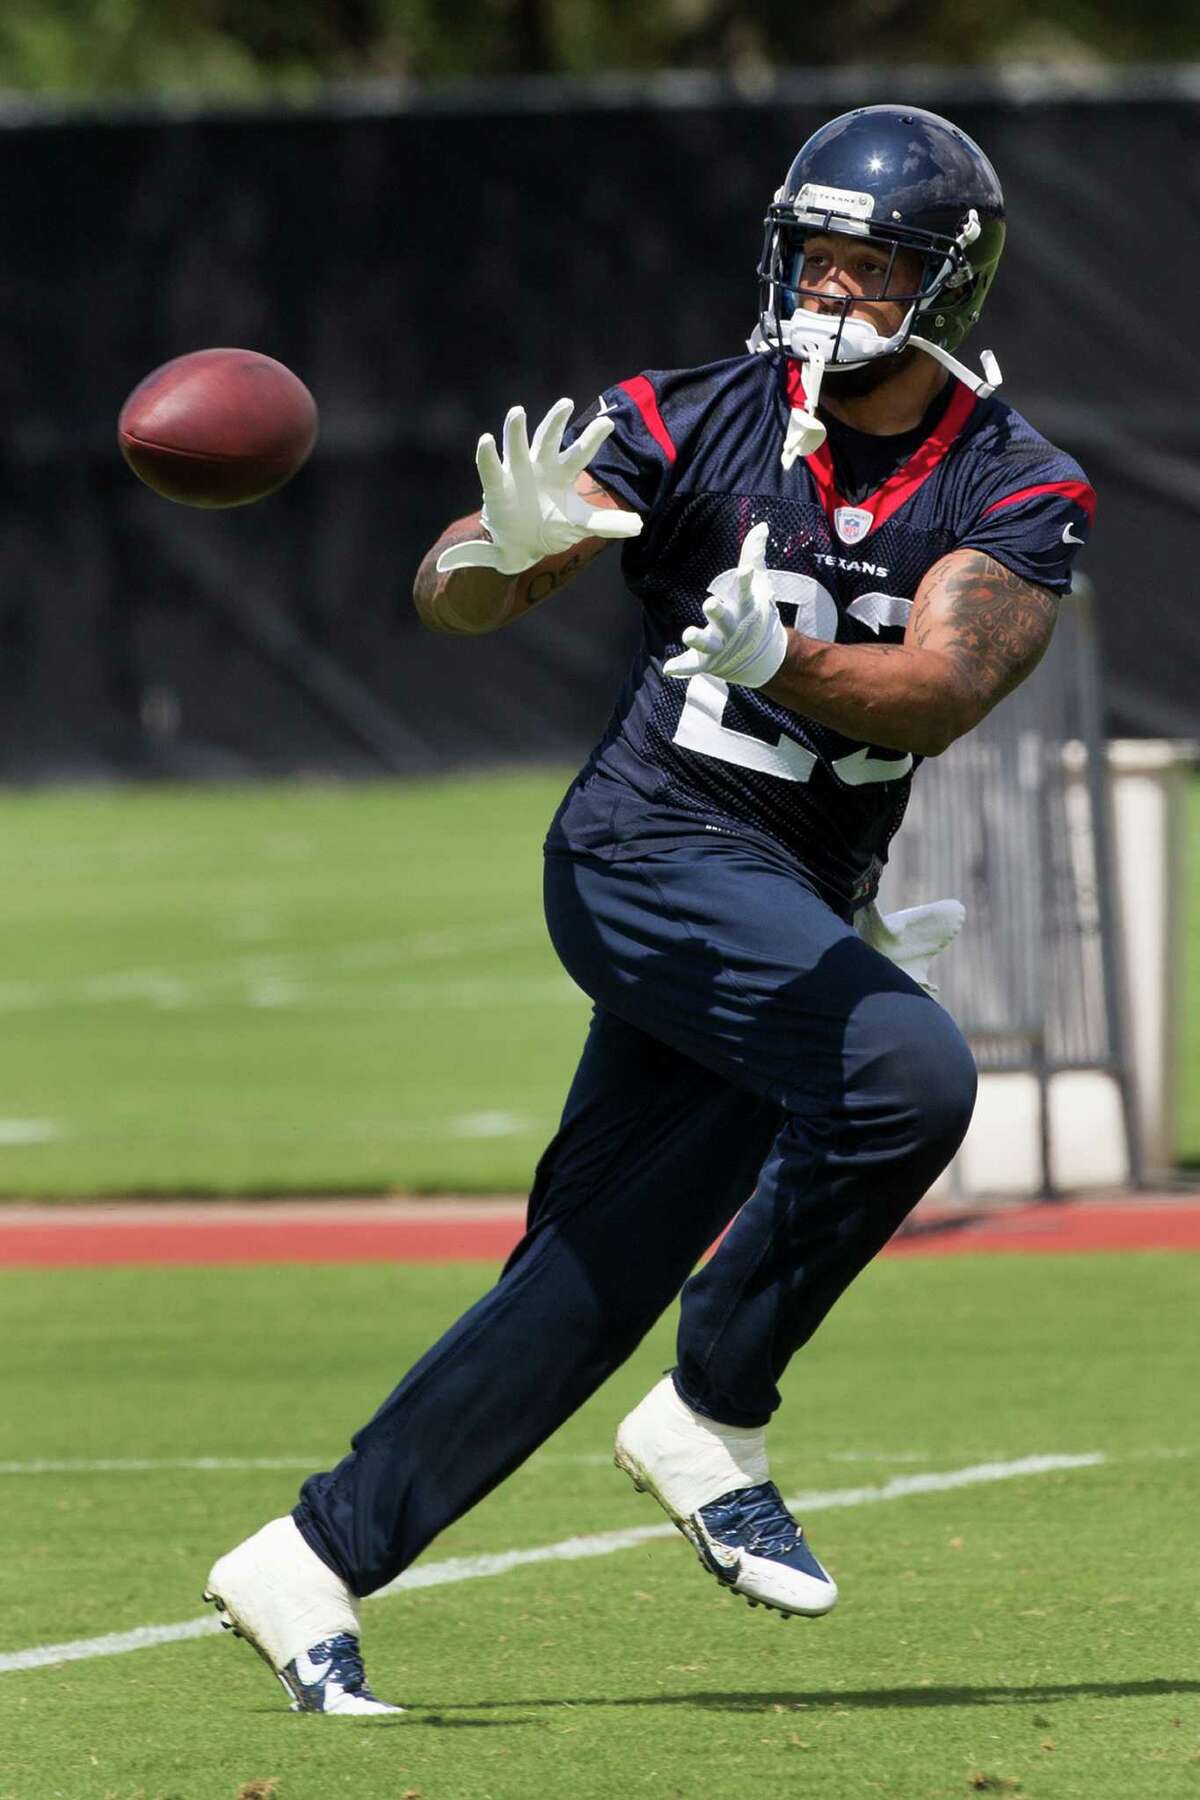 Arian Foster displays the pass-catching ability that has caught the eye of new head coach Bill O'Brien during Tuesday's OTA.